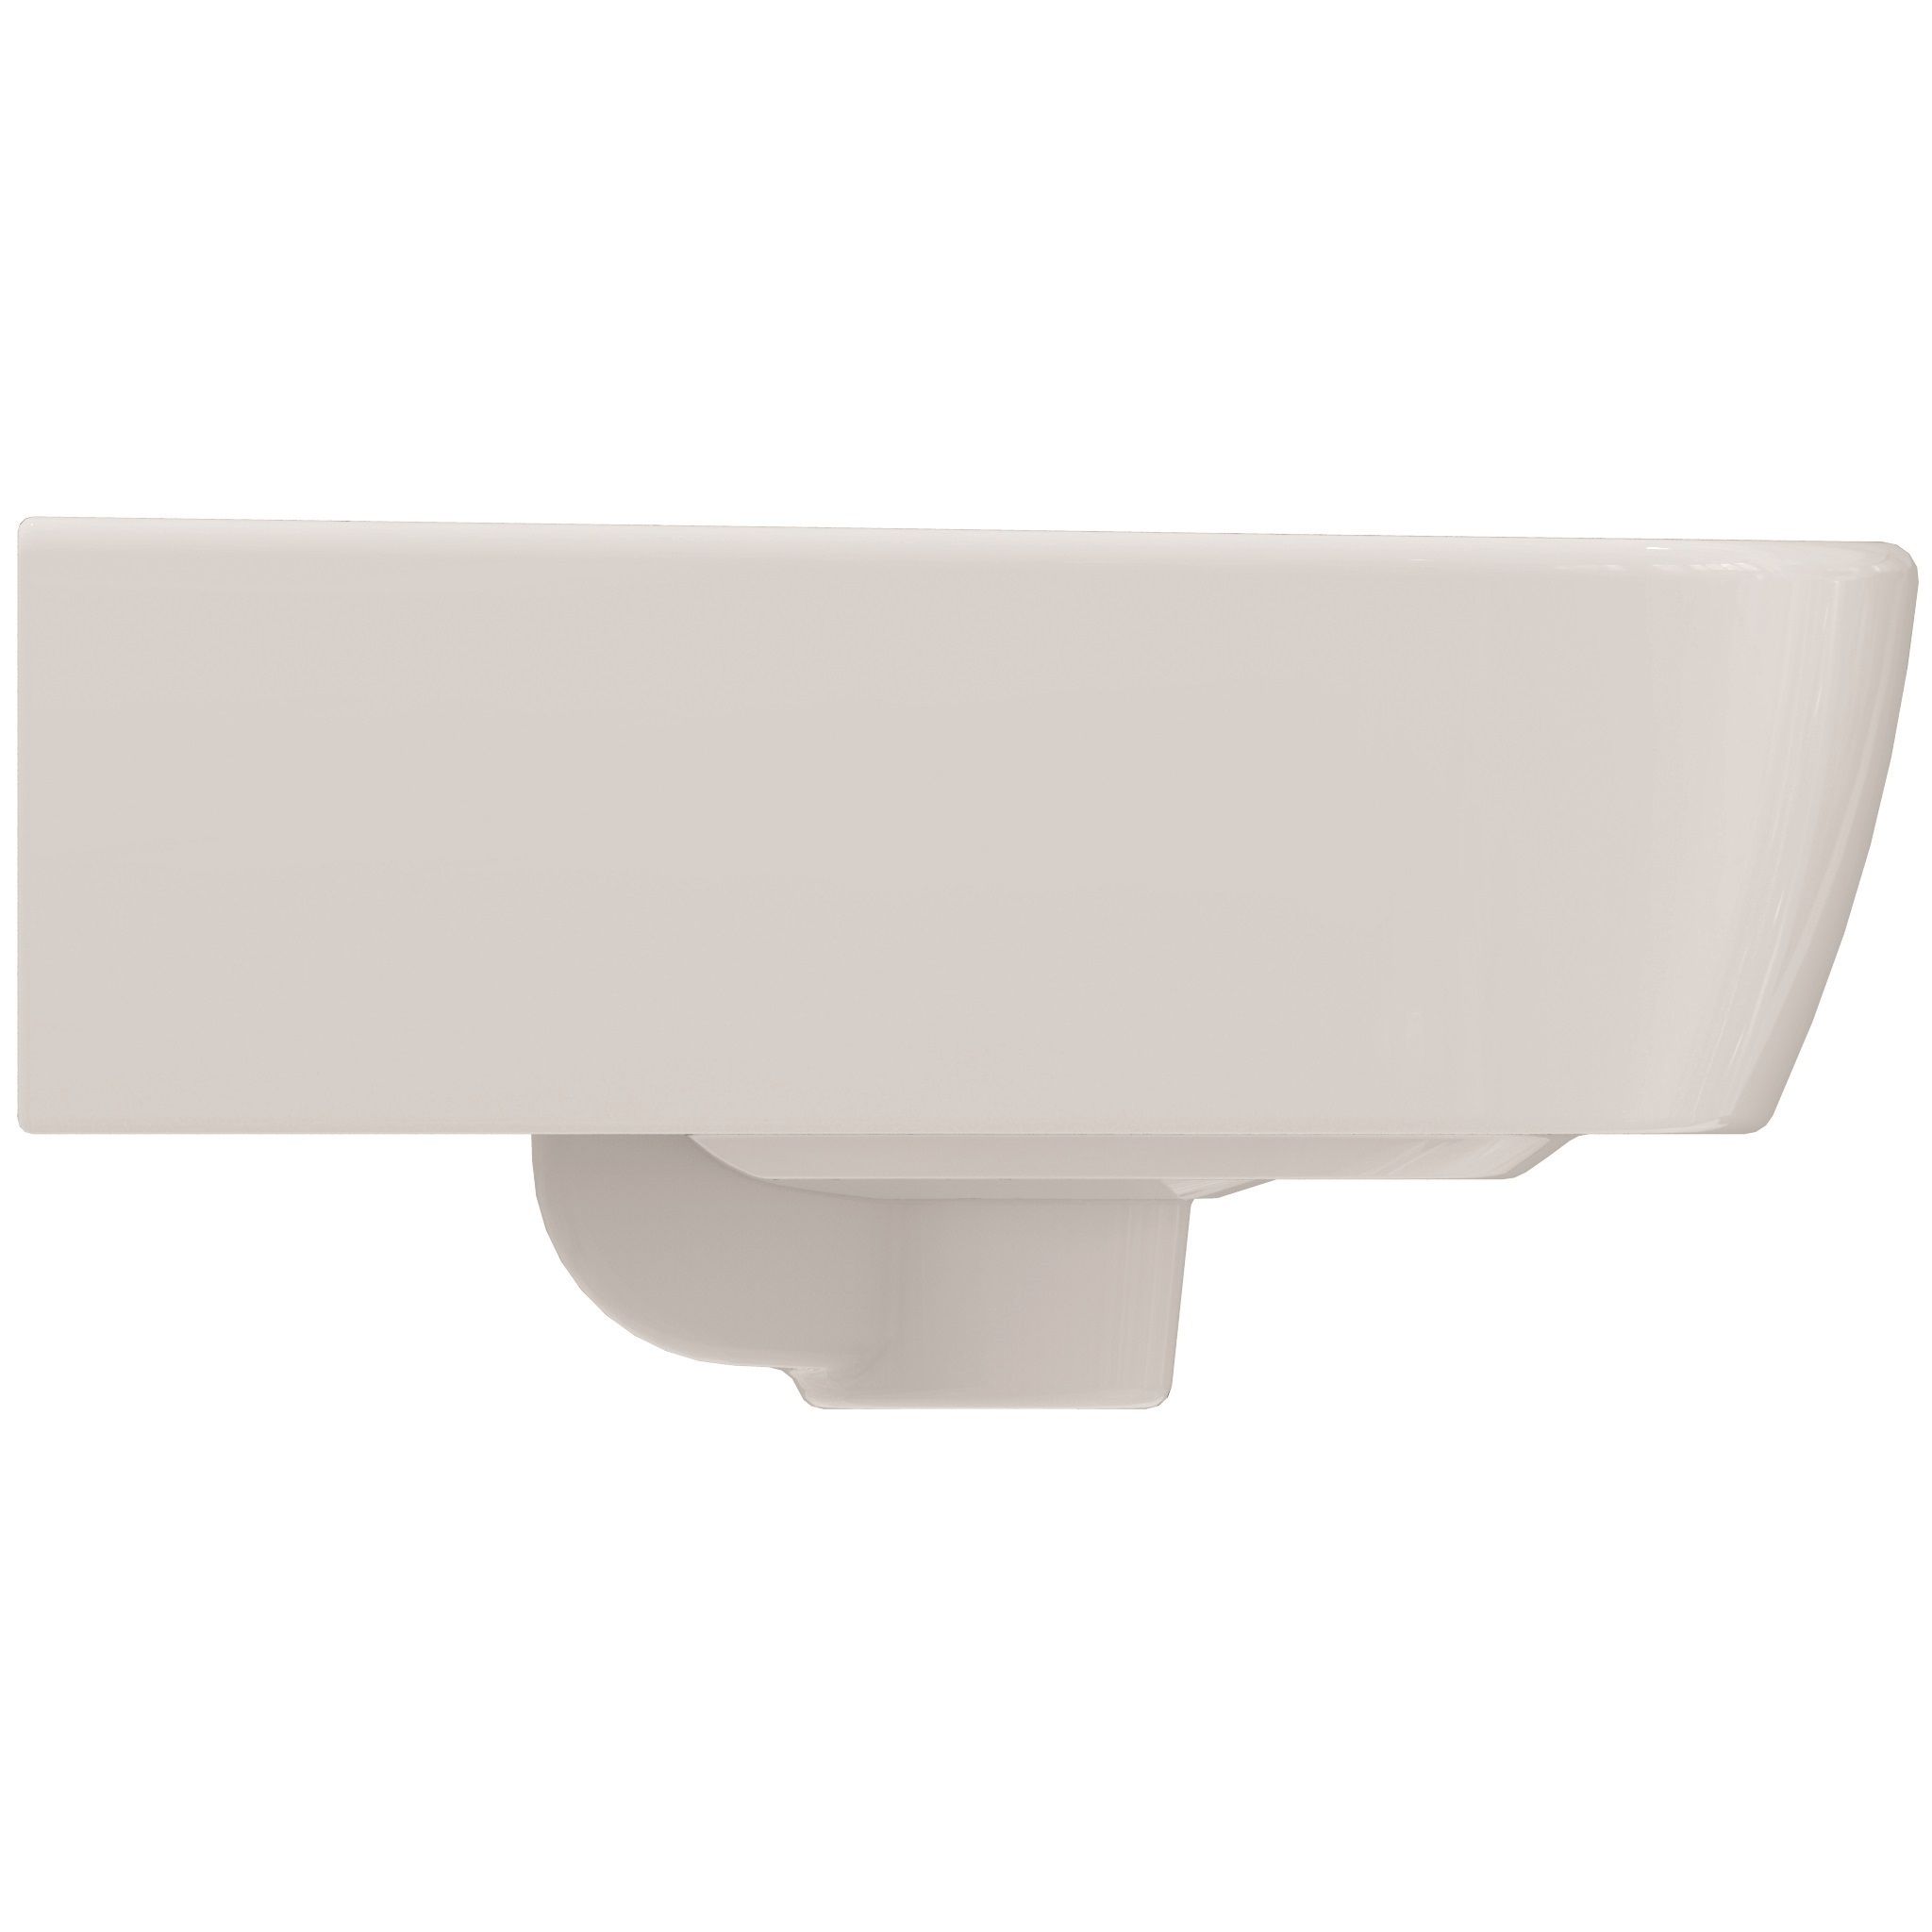 Armitage Shanks Tempo White D-shaped Wall-mounted Cloakroom Basin (W)40cm